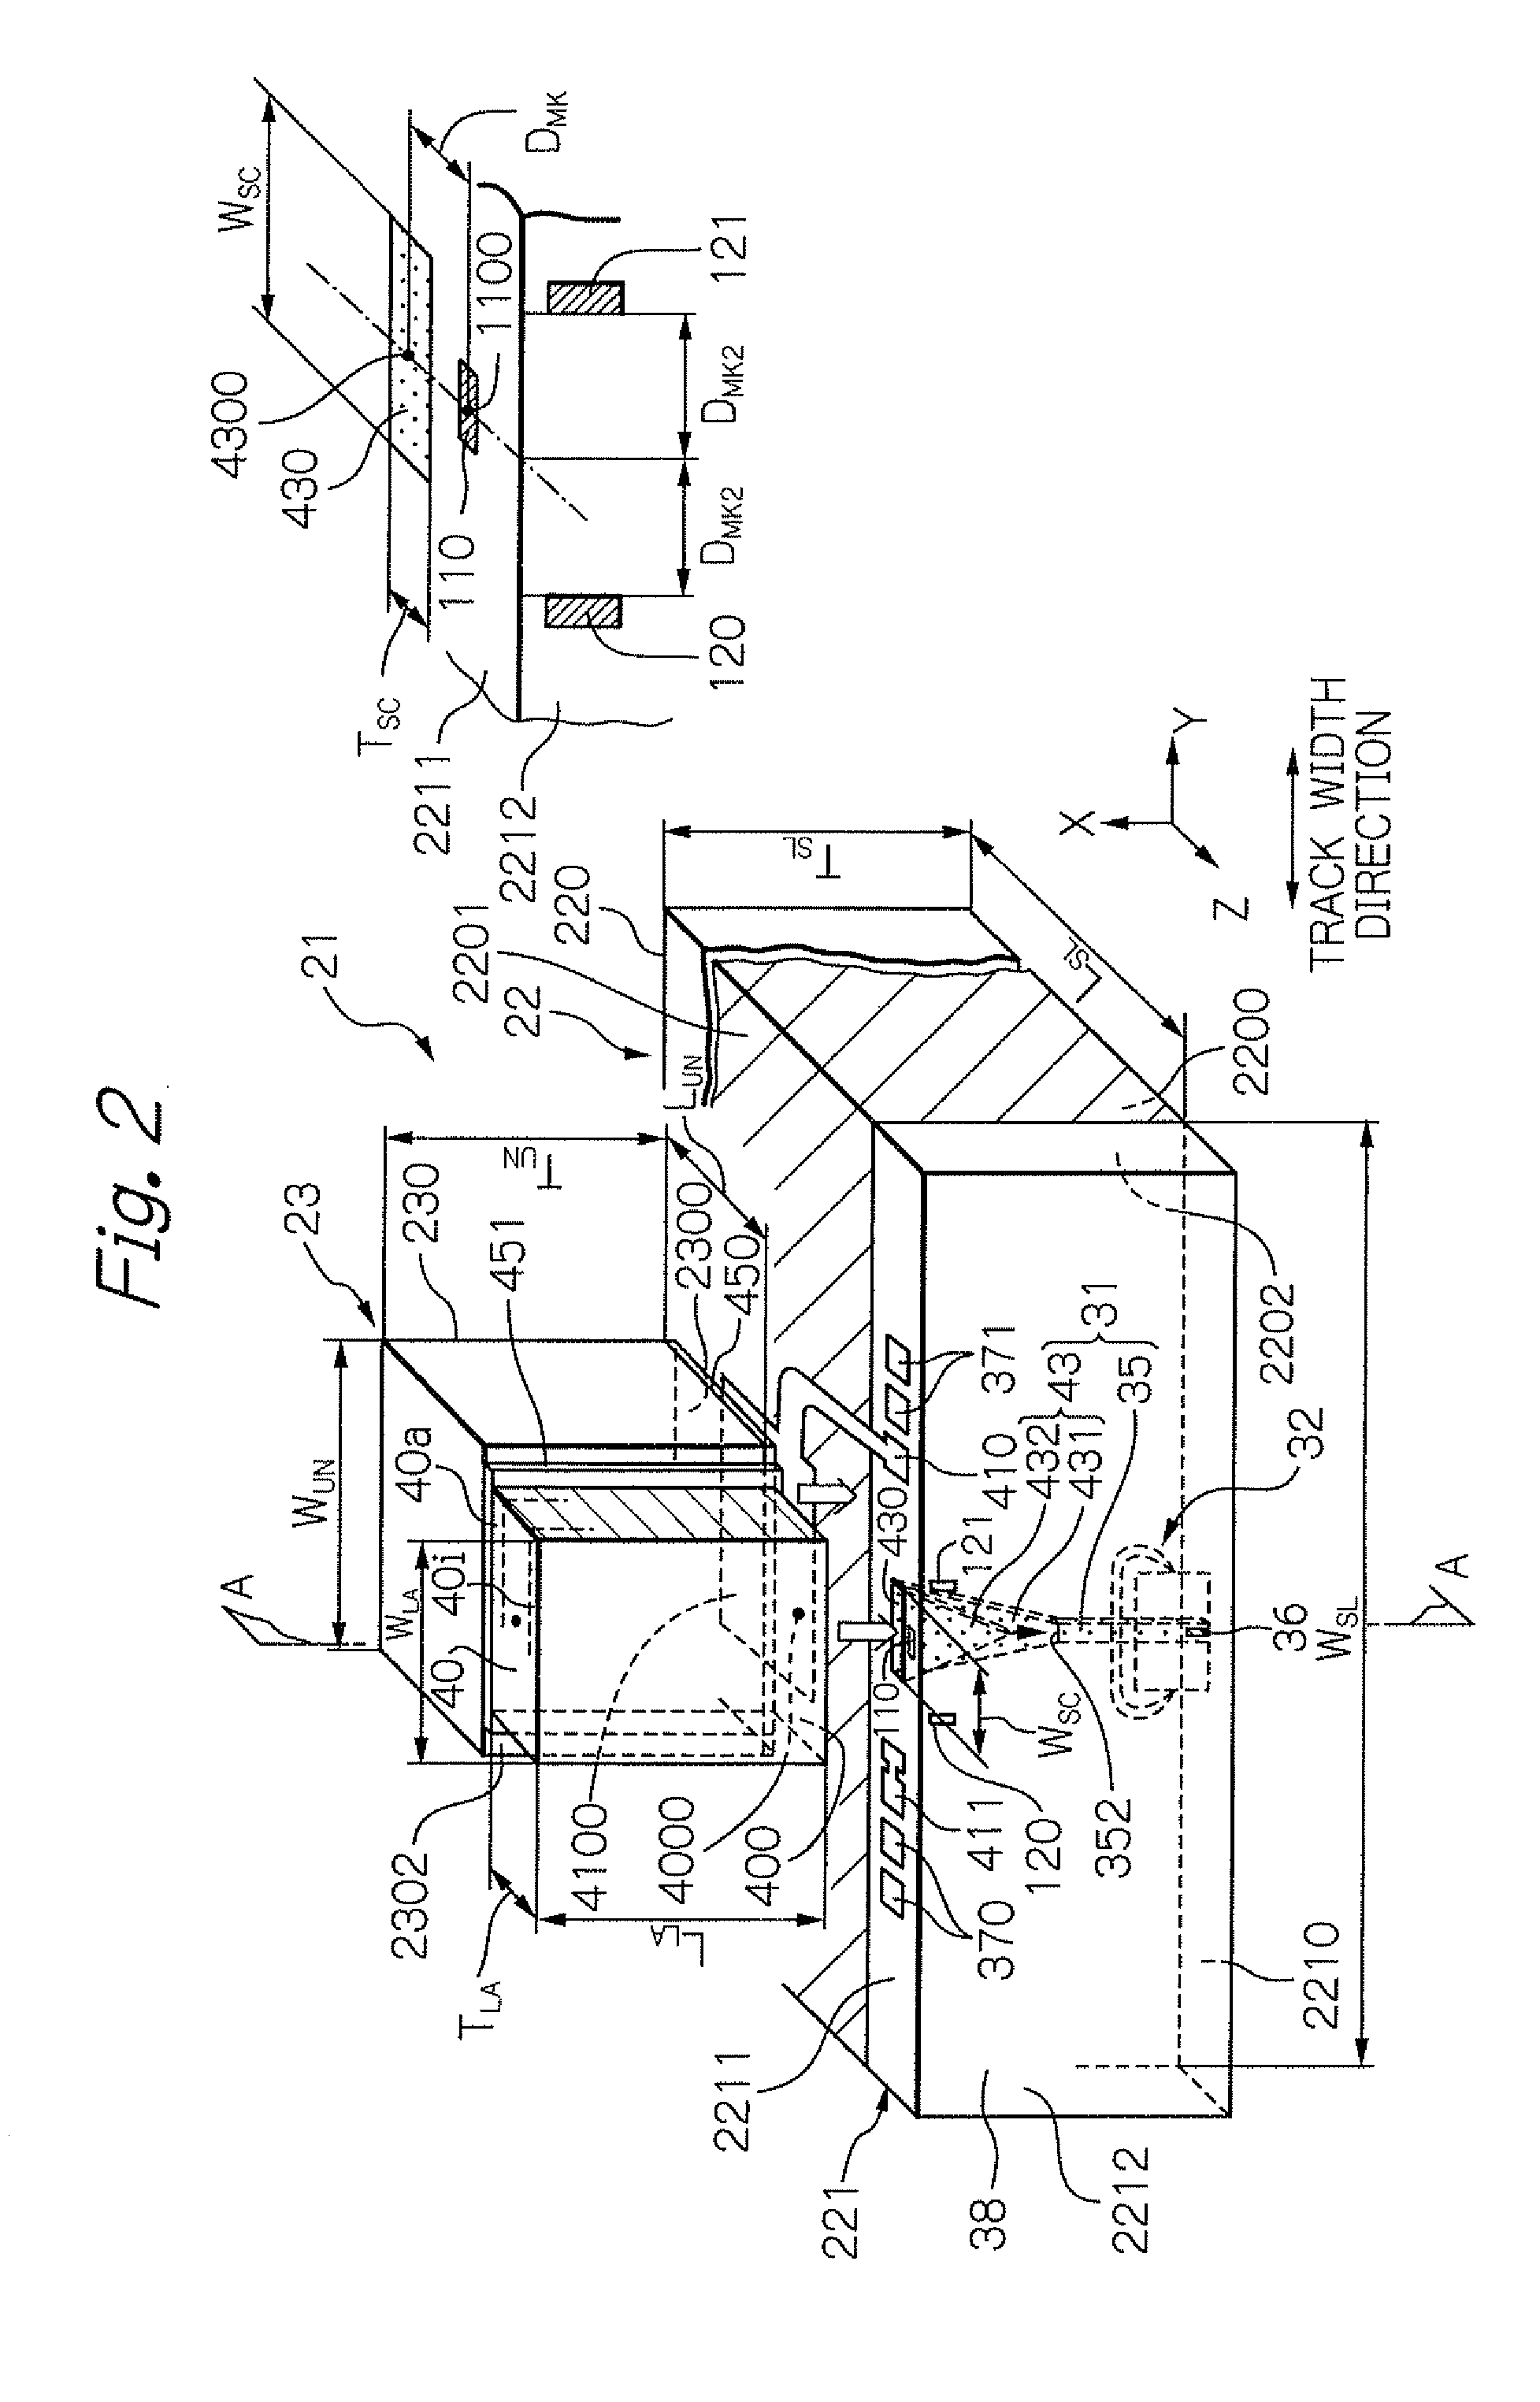 Method for manufacturing thermally-assisted magnetic recording head by semi-active alignment